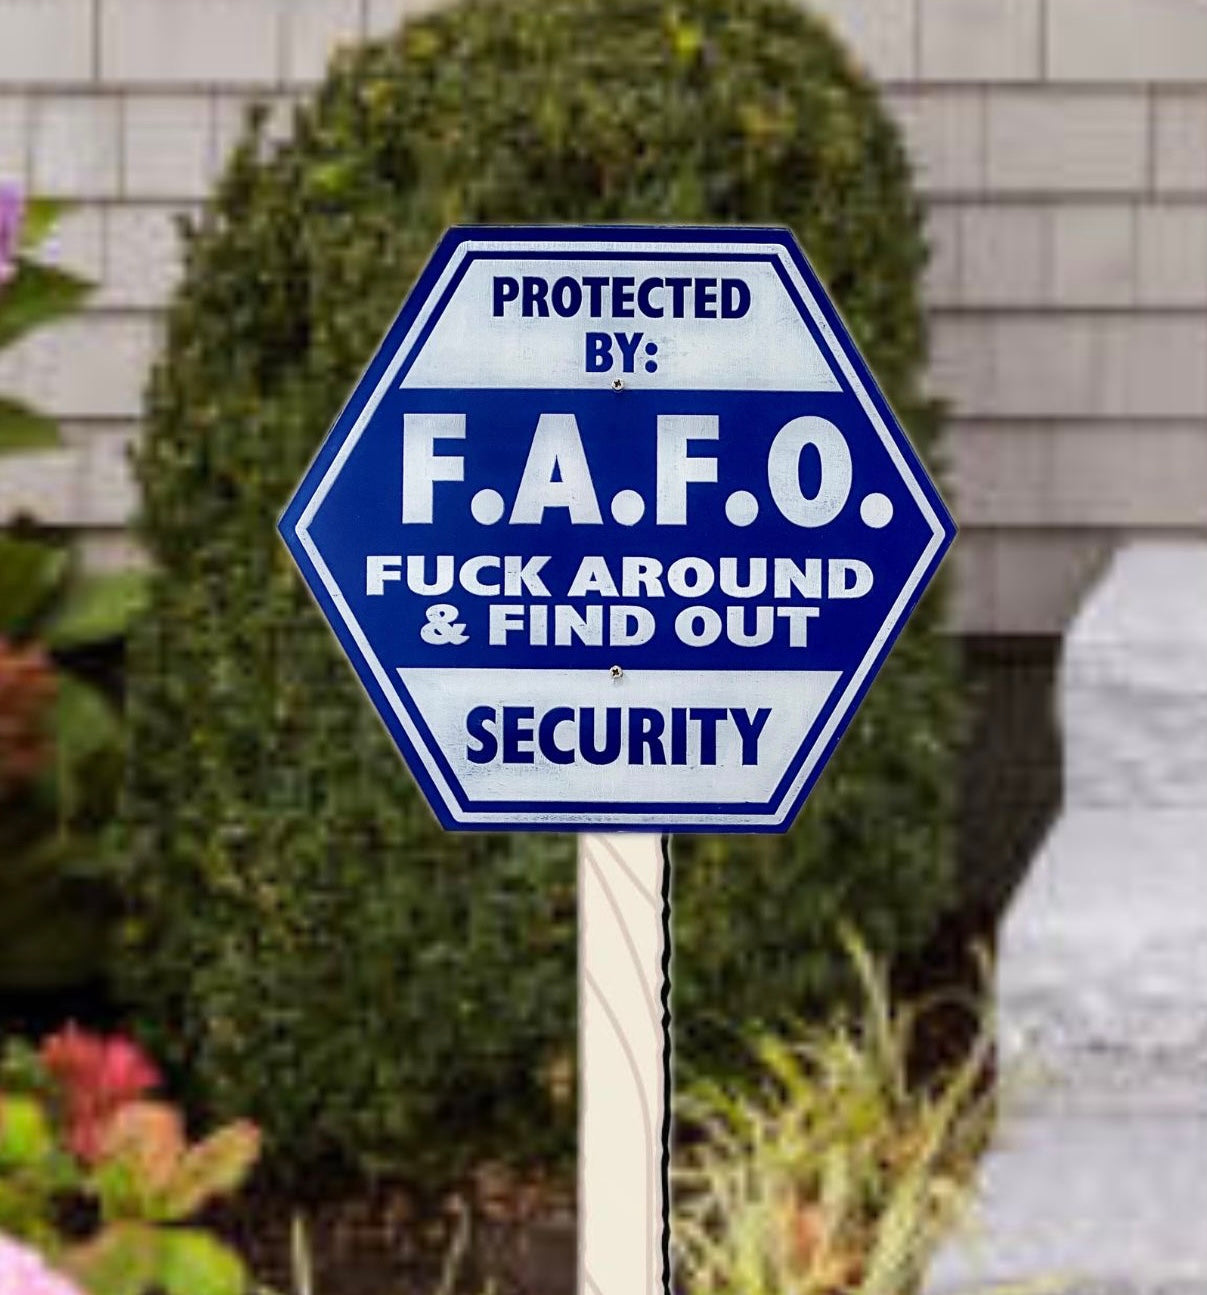 FAFO Fuck Around And Find Out Security Acrylic Yard Sign